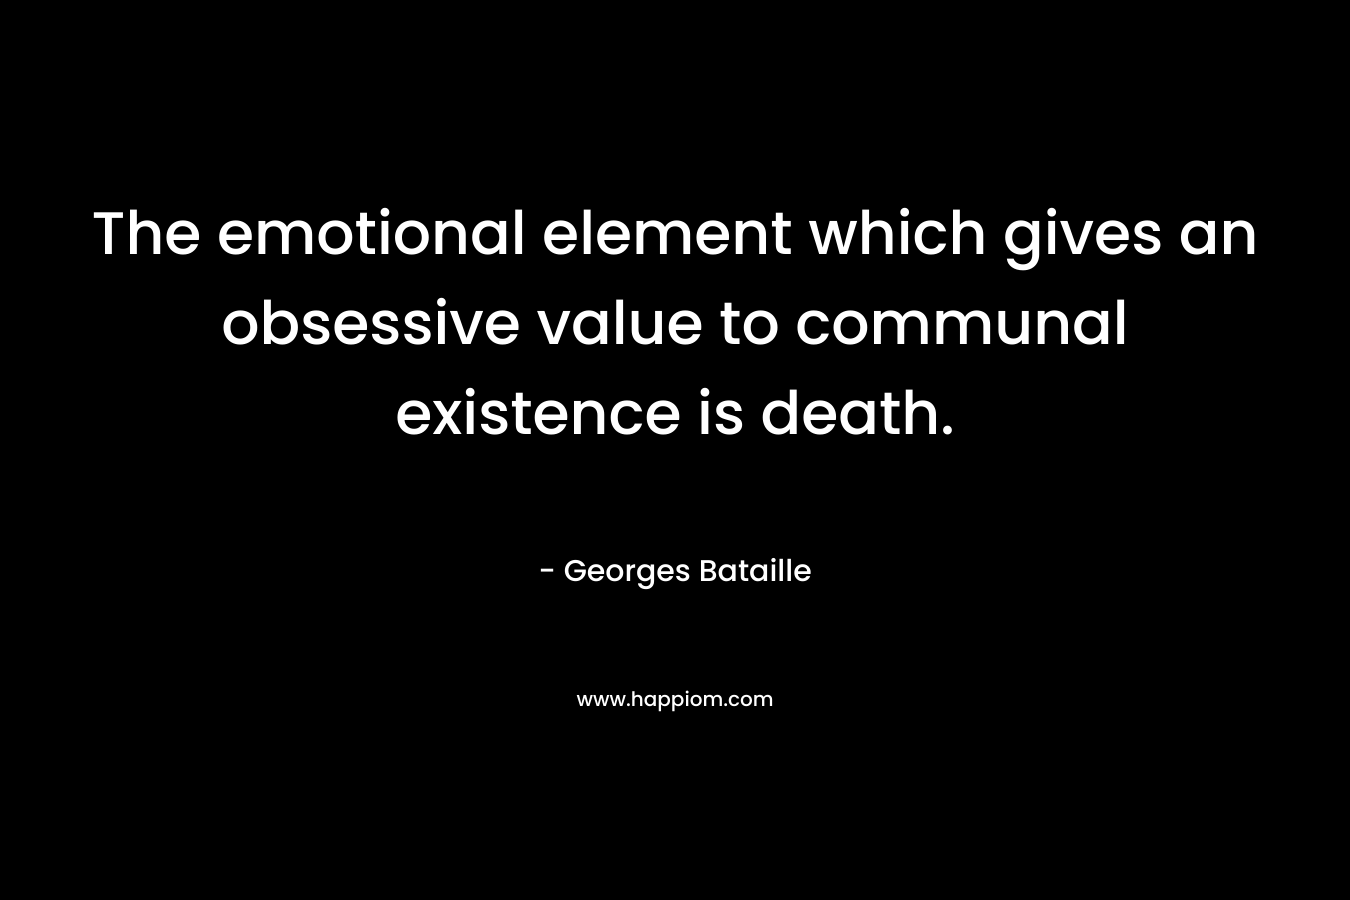 The emotional element which gives an obsessive value to communal existence is death.